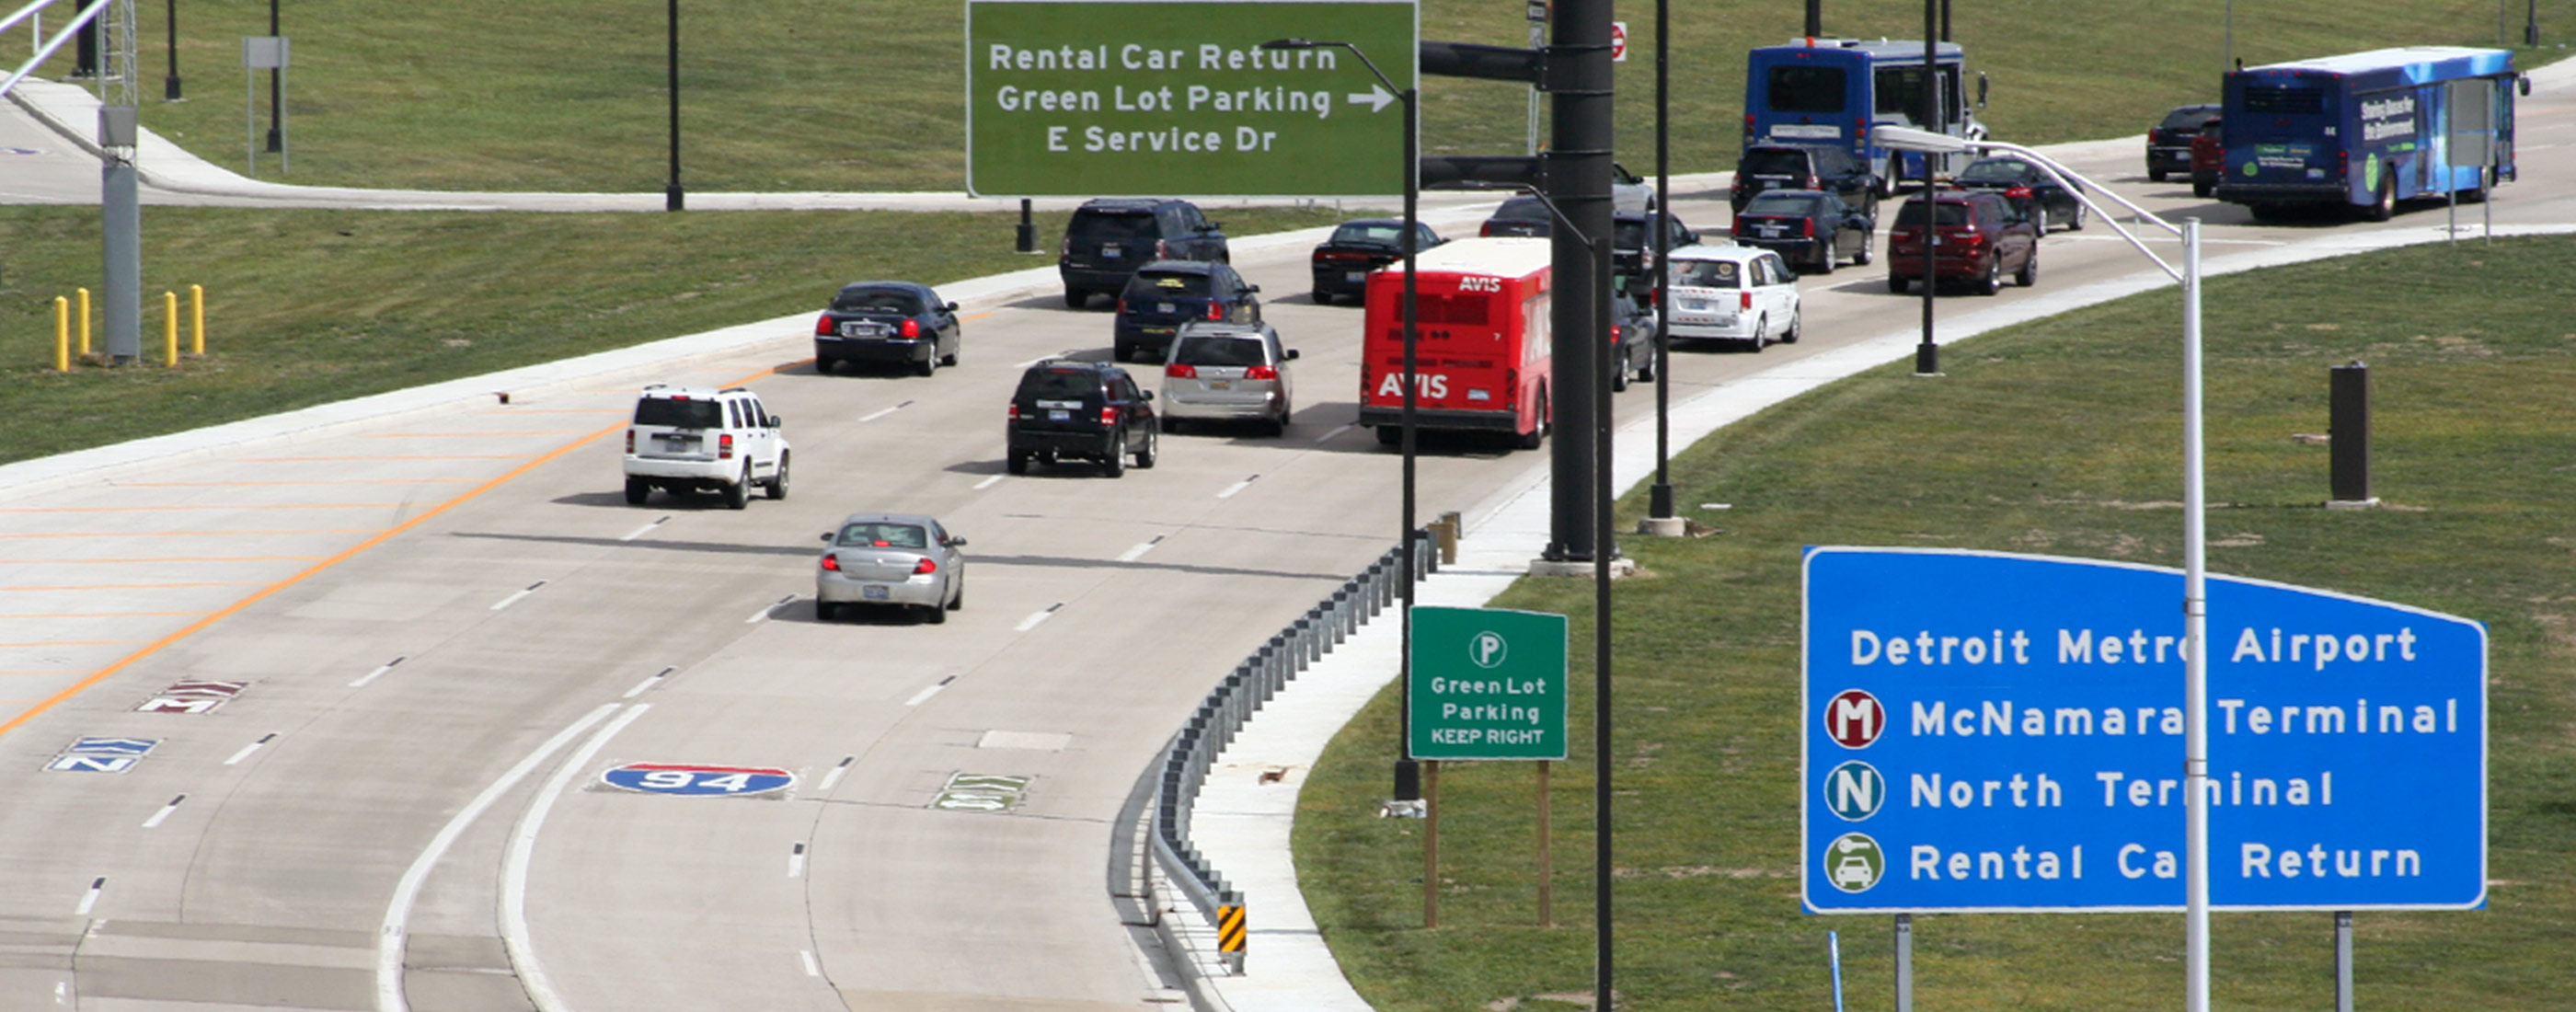 The Detroit Metropolitan Airport entrance now includes better signage and less traffic, thanks to work from OHM Advisors.